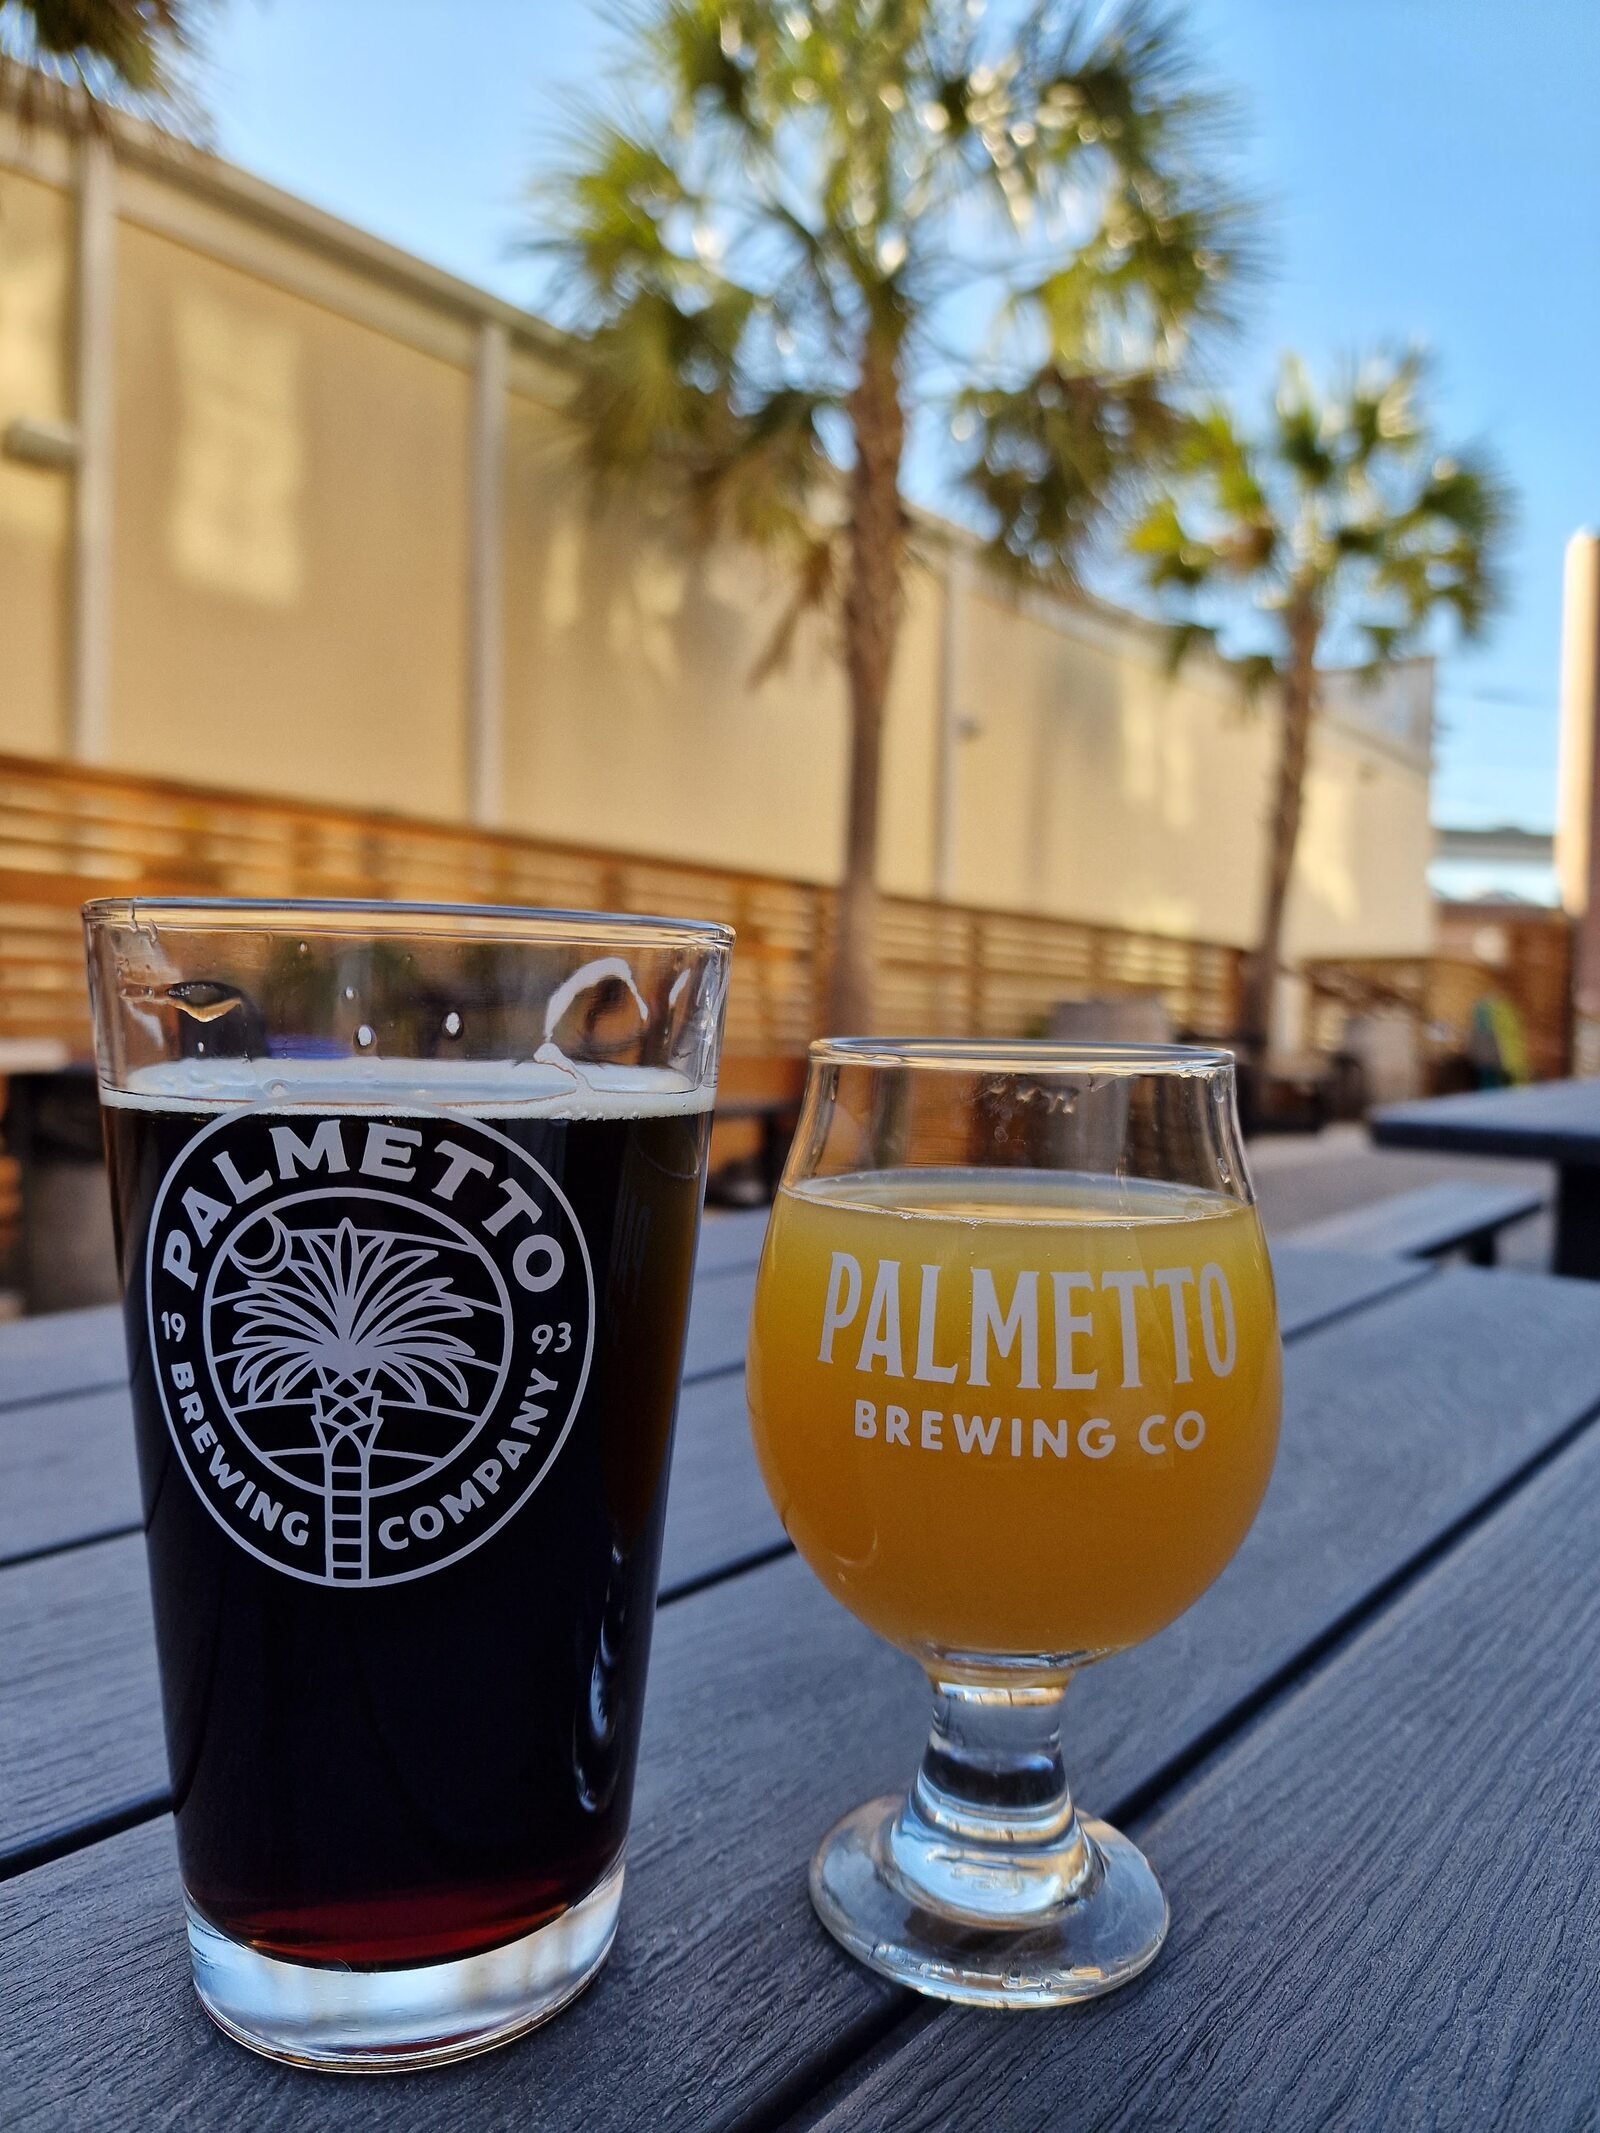 beers at Palmetto brewery in Charleston